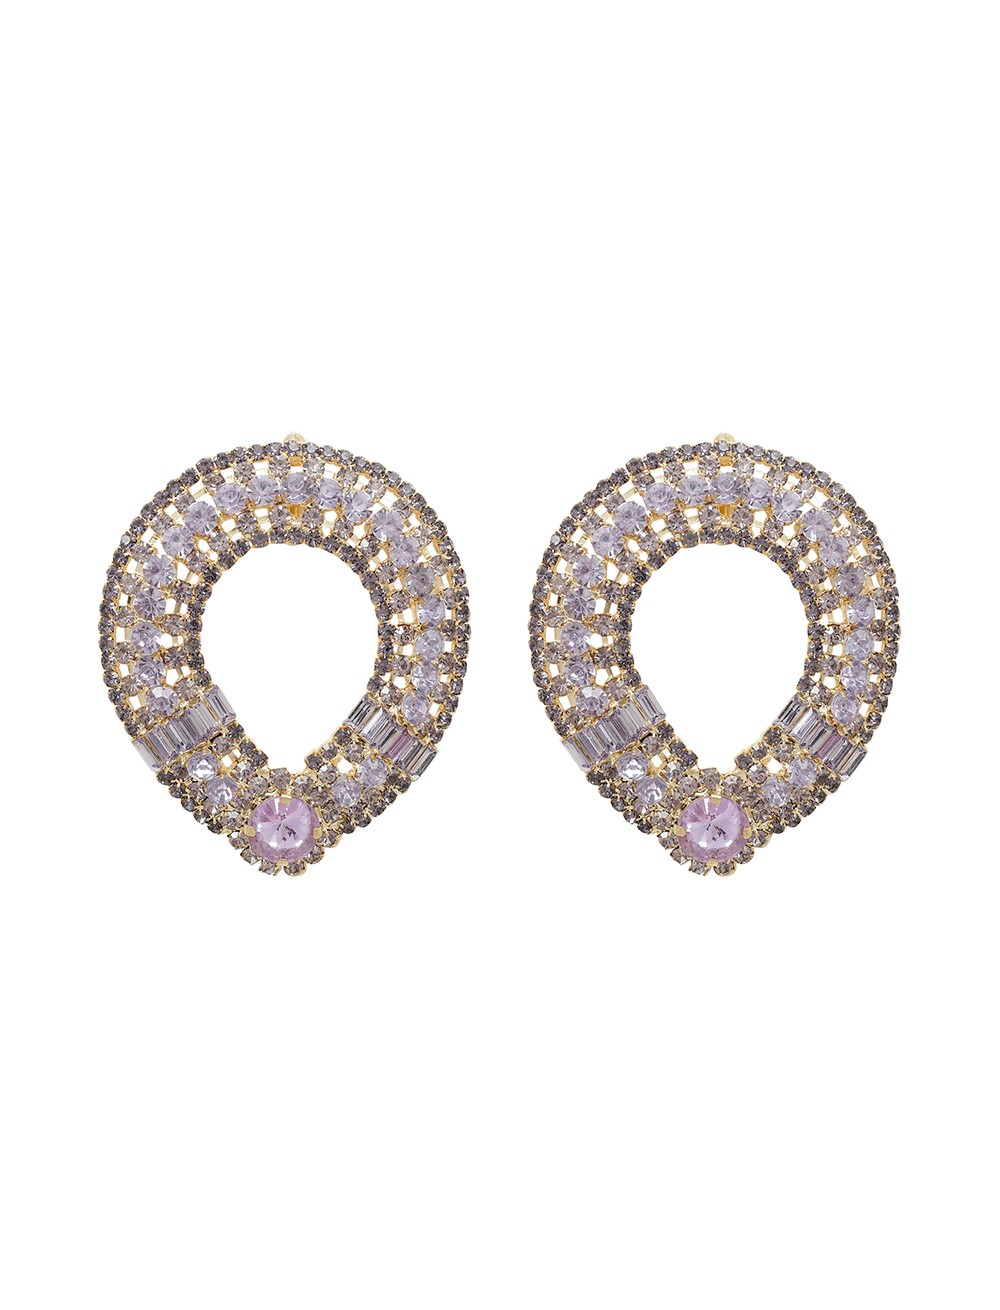 Gold Oval Earrings With Lilac Crystals